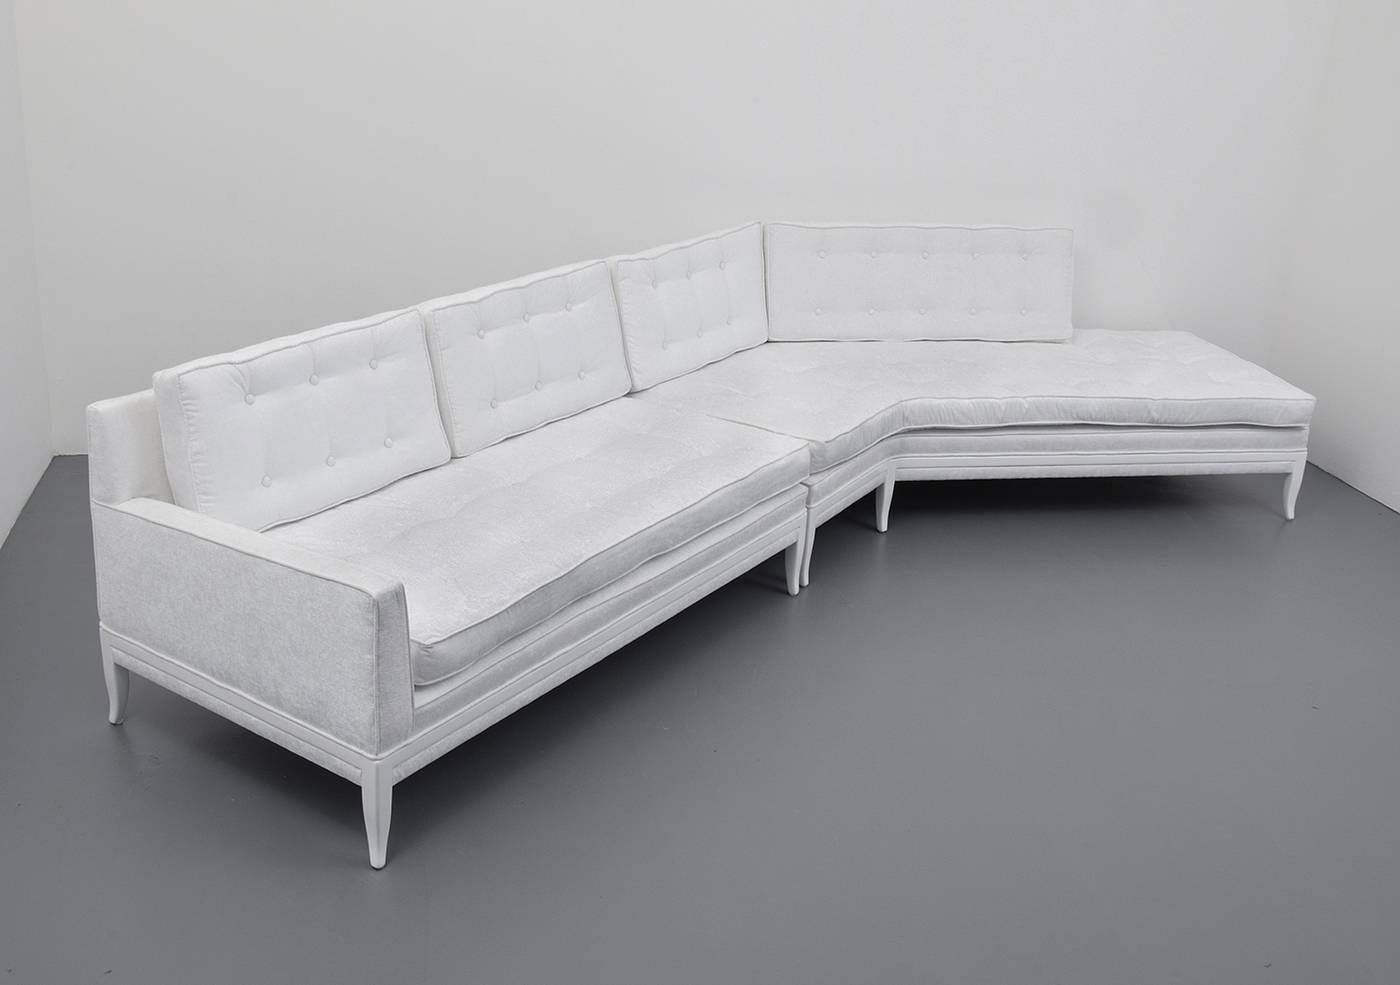 Large two-piece sectional sofa by Tommi Parzinger for Parzinger Originals. The sofa has been refinished and reupholstered.
 